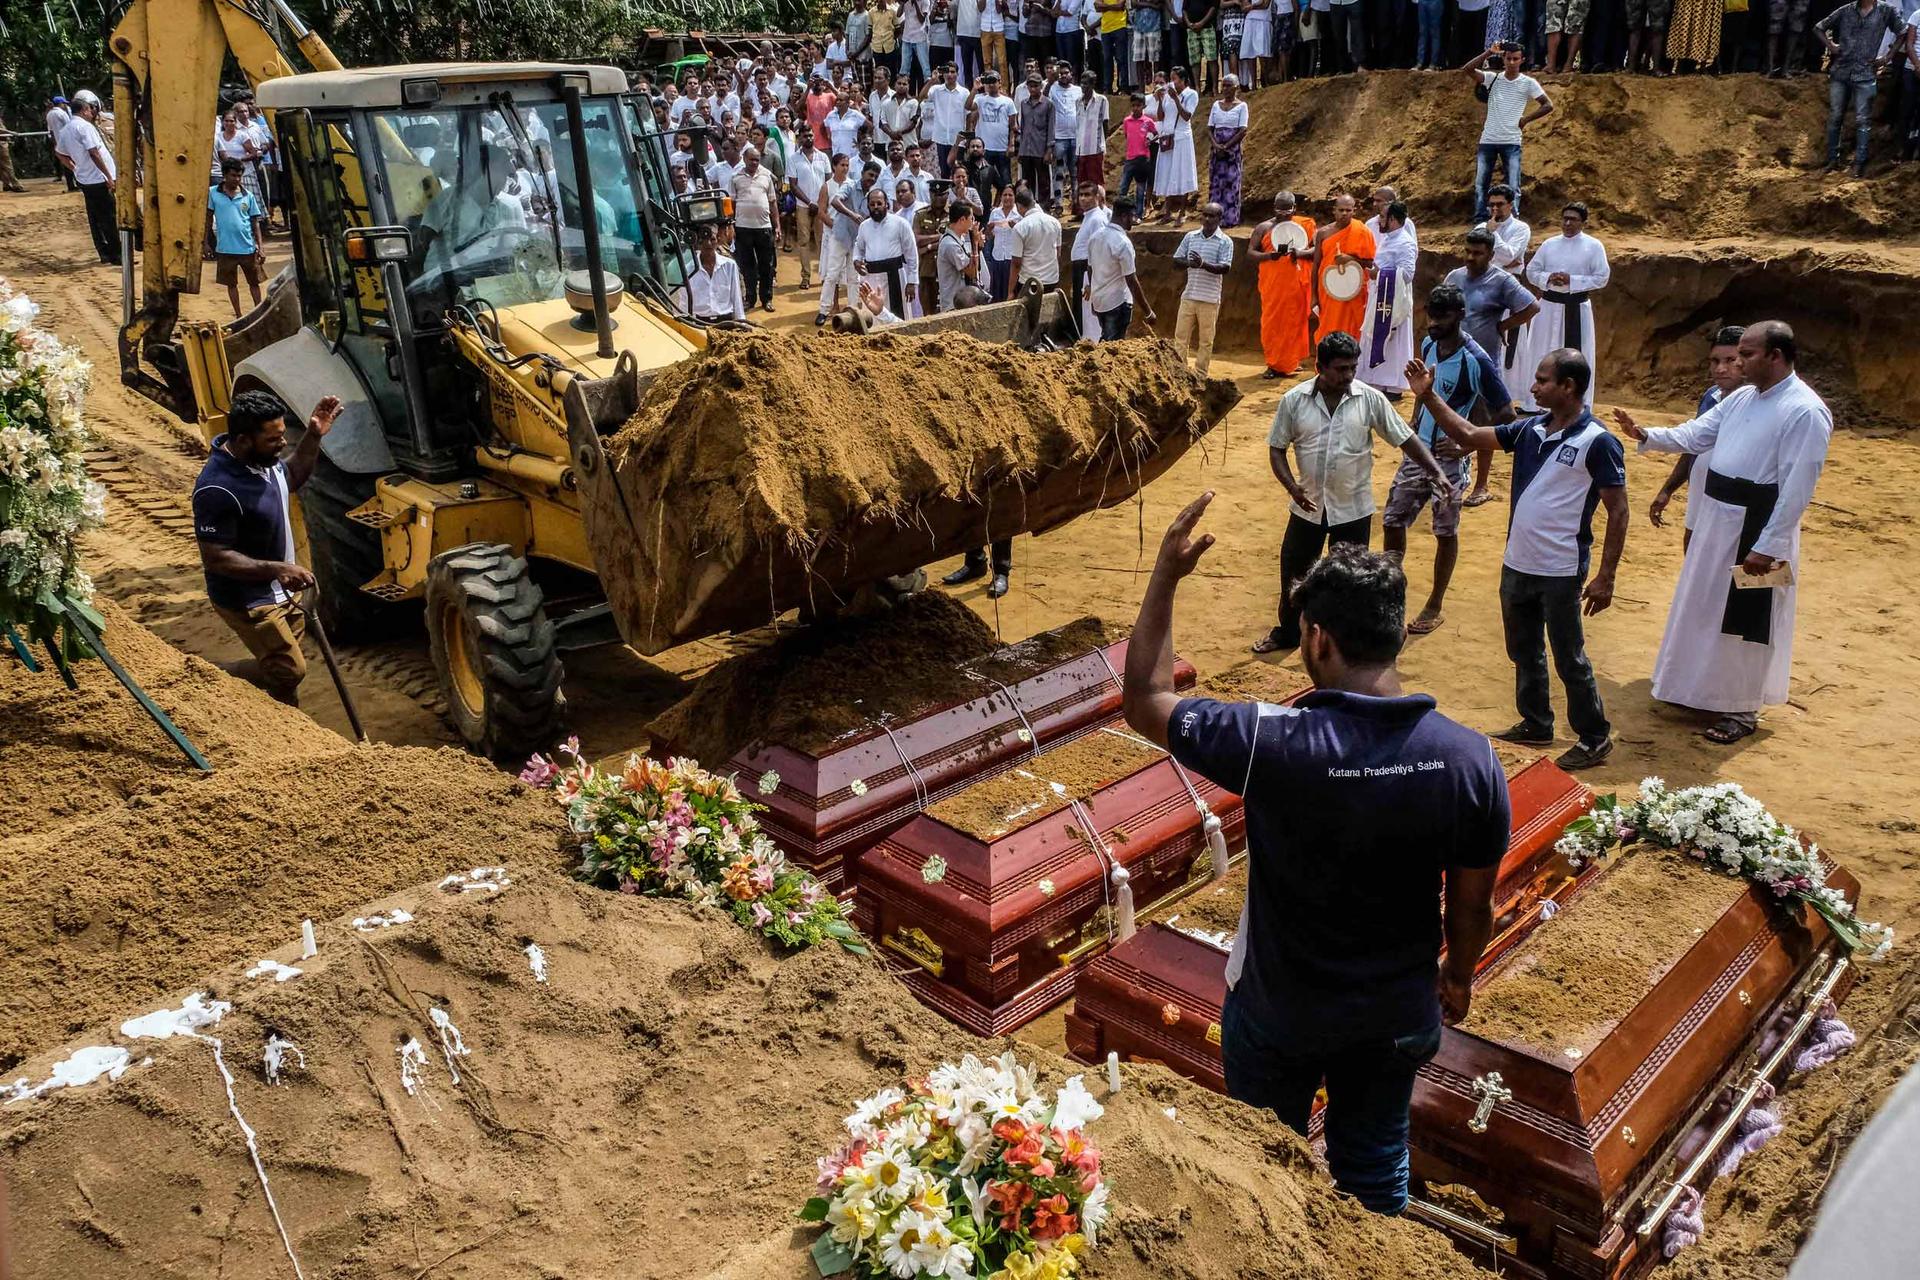 A man waves a backhoe as it lifts dirt to drop onto four caskets laid out in a row